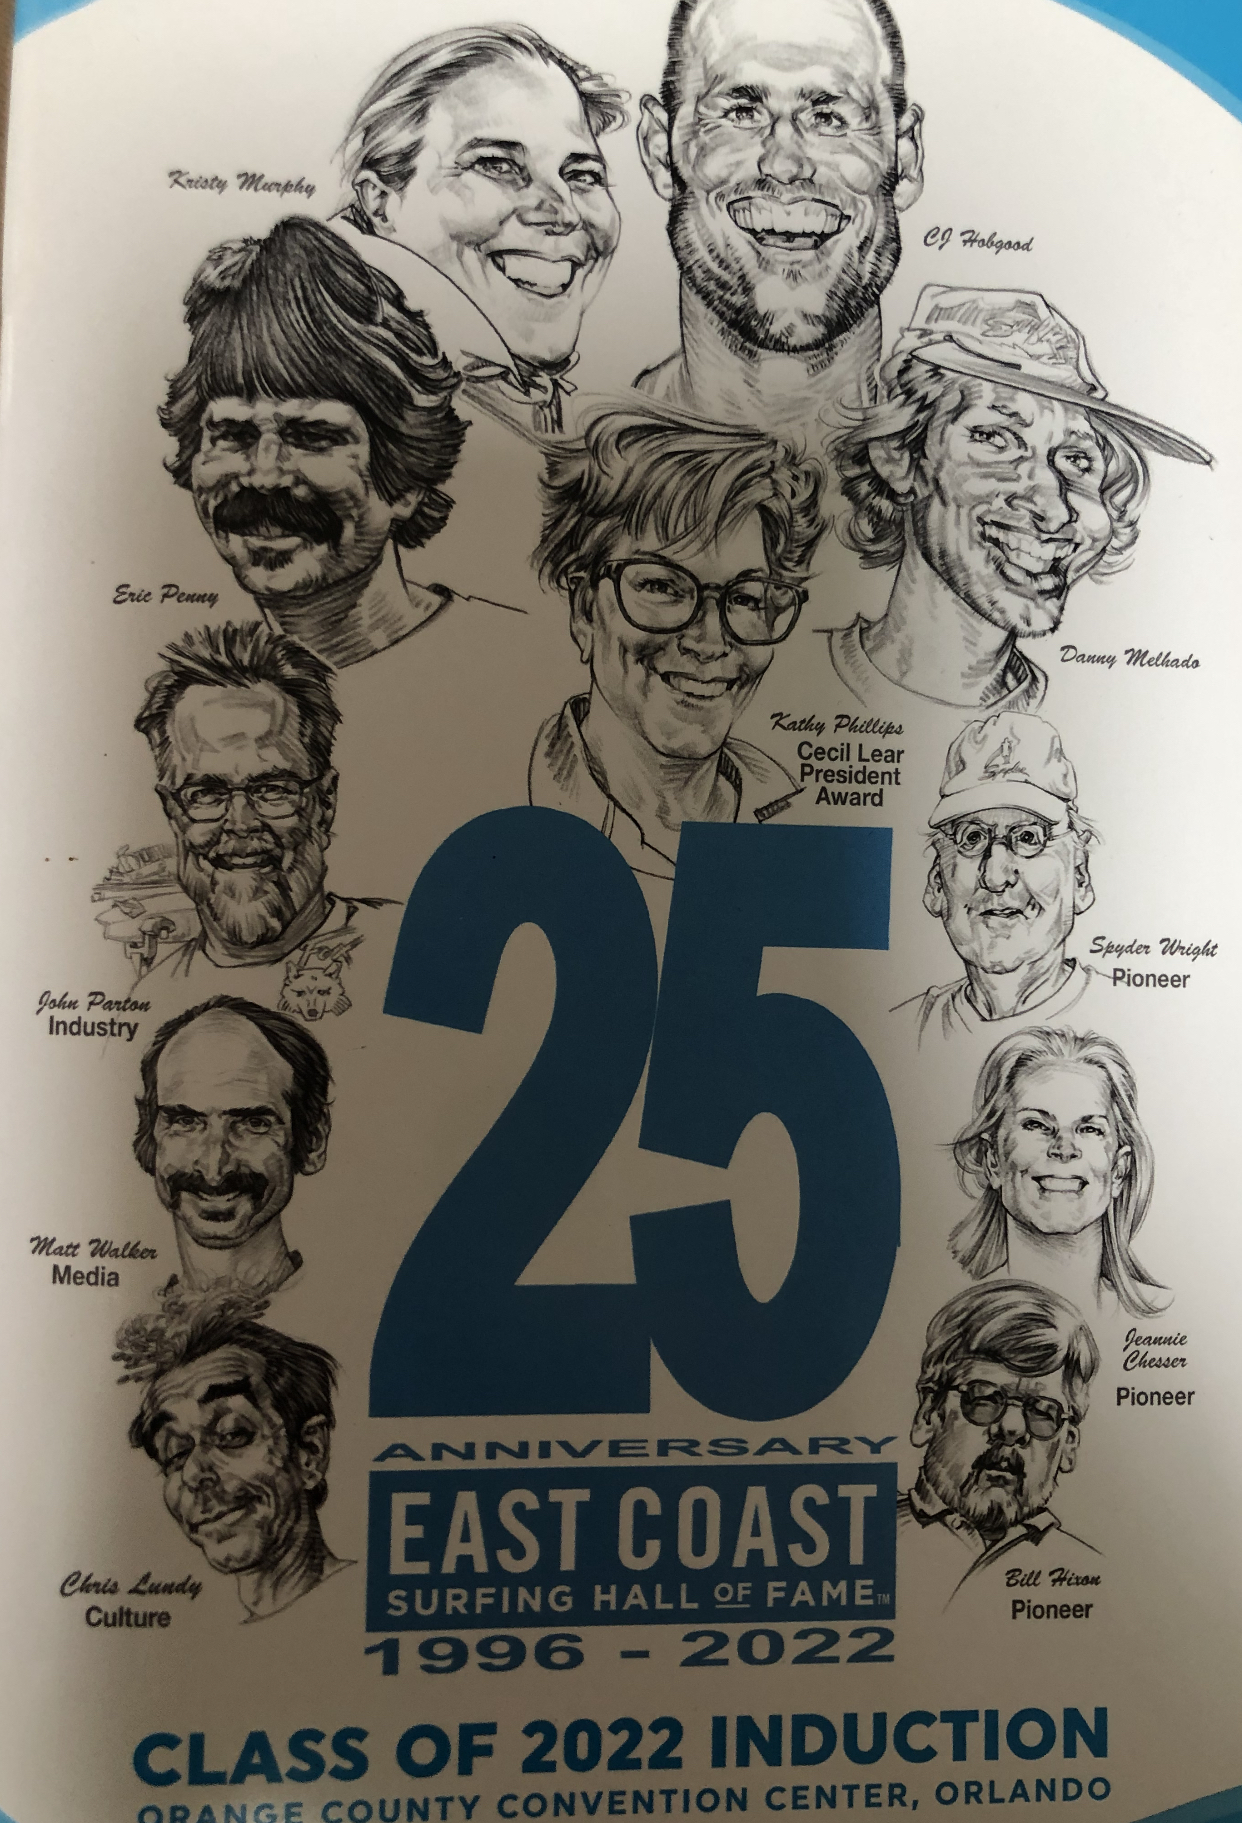 The cover of the program for the East Coast Surfing Hall of Fame, featuring Eric Penny.